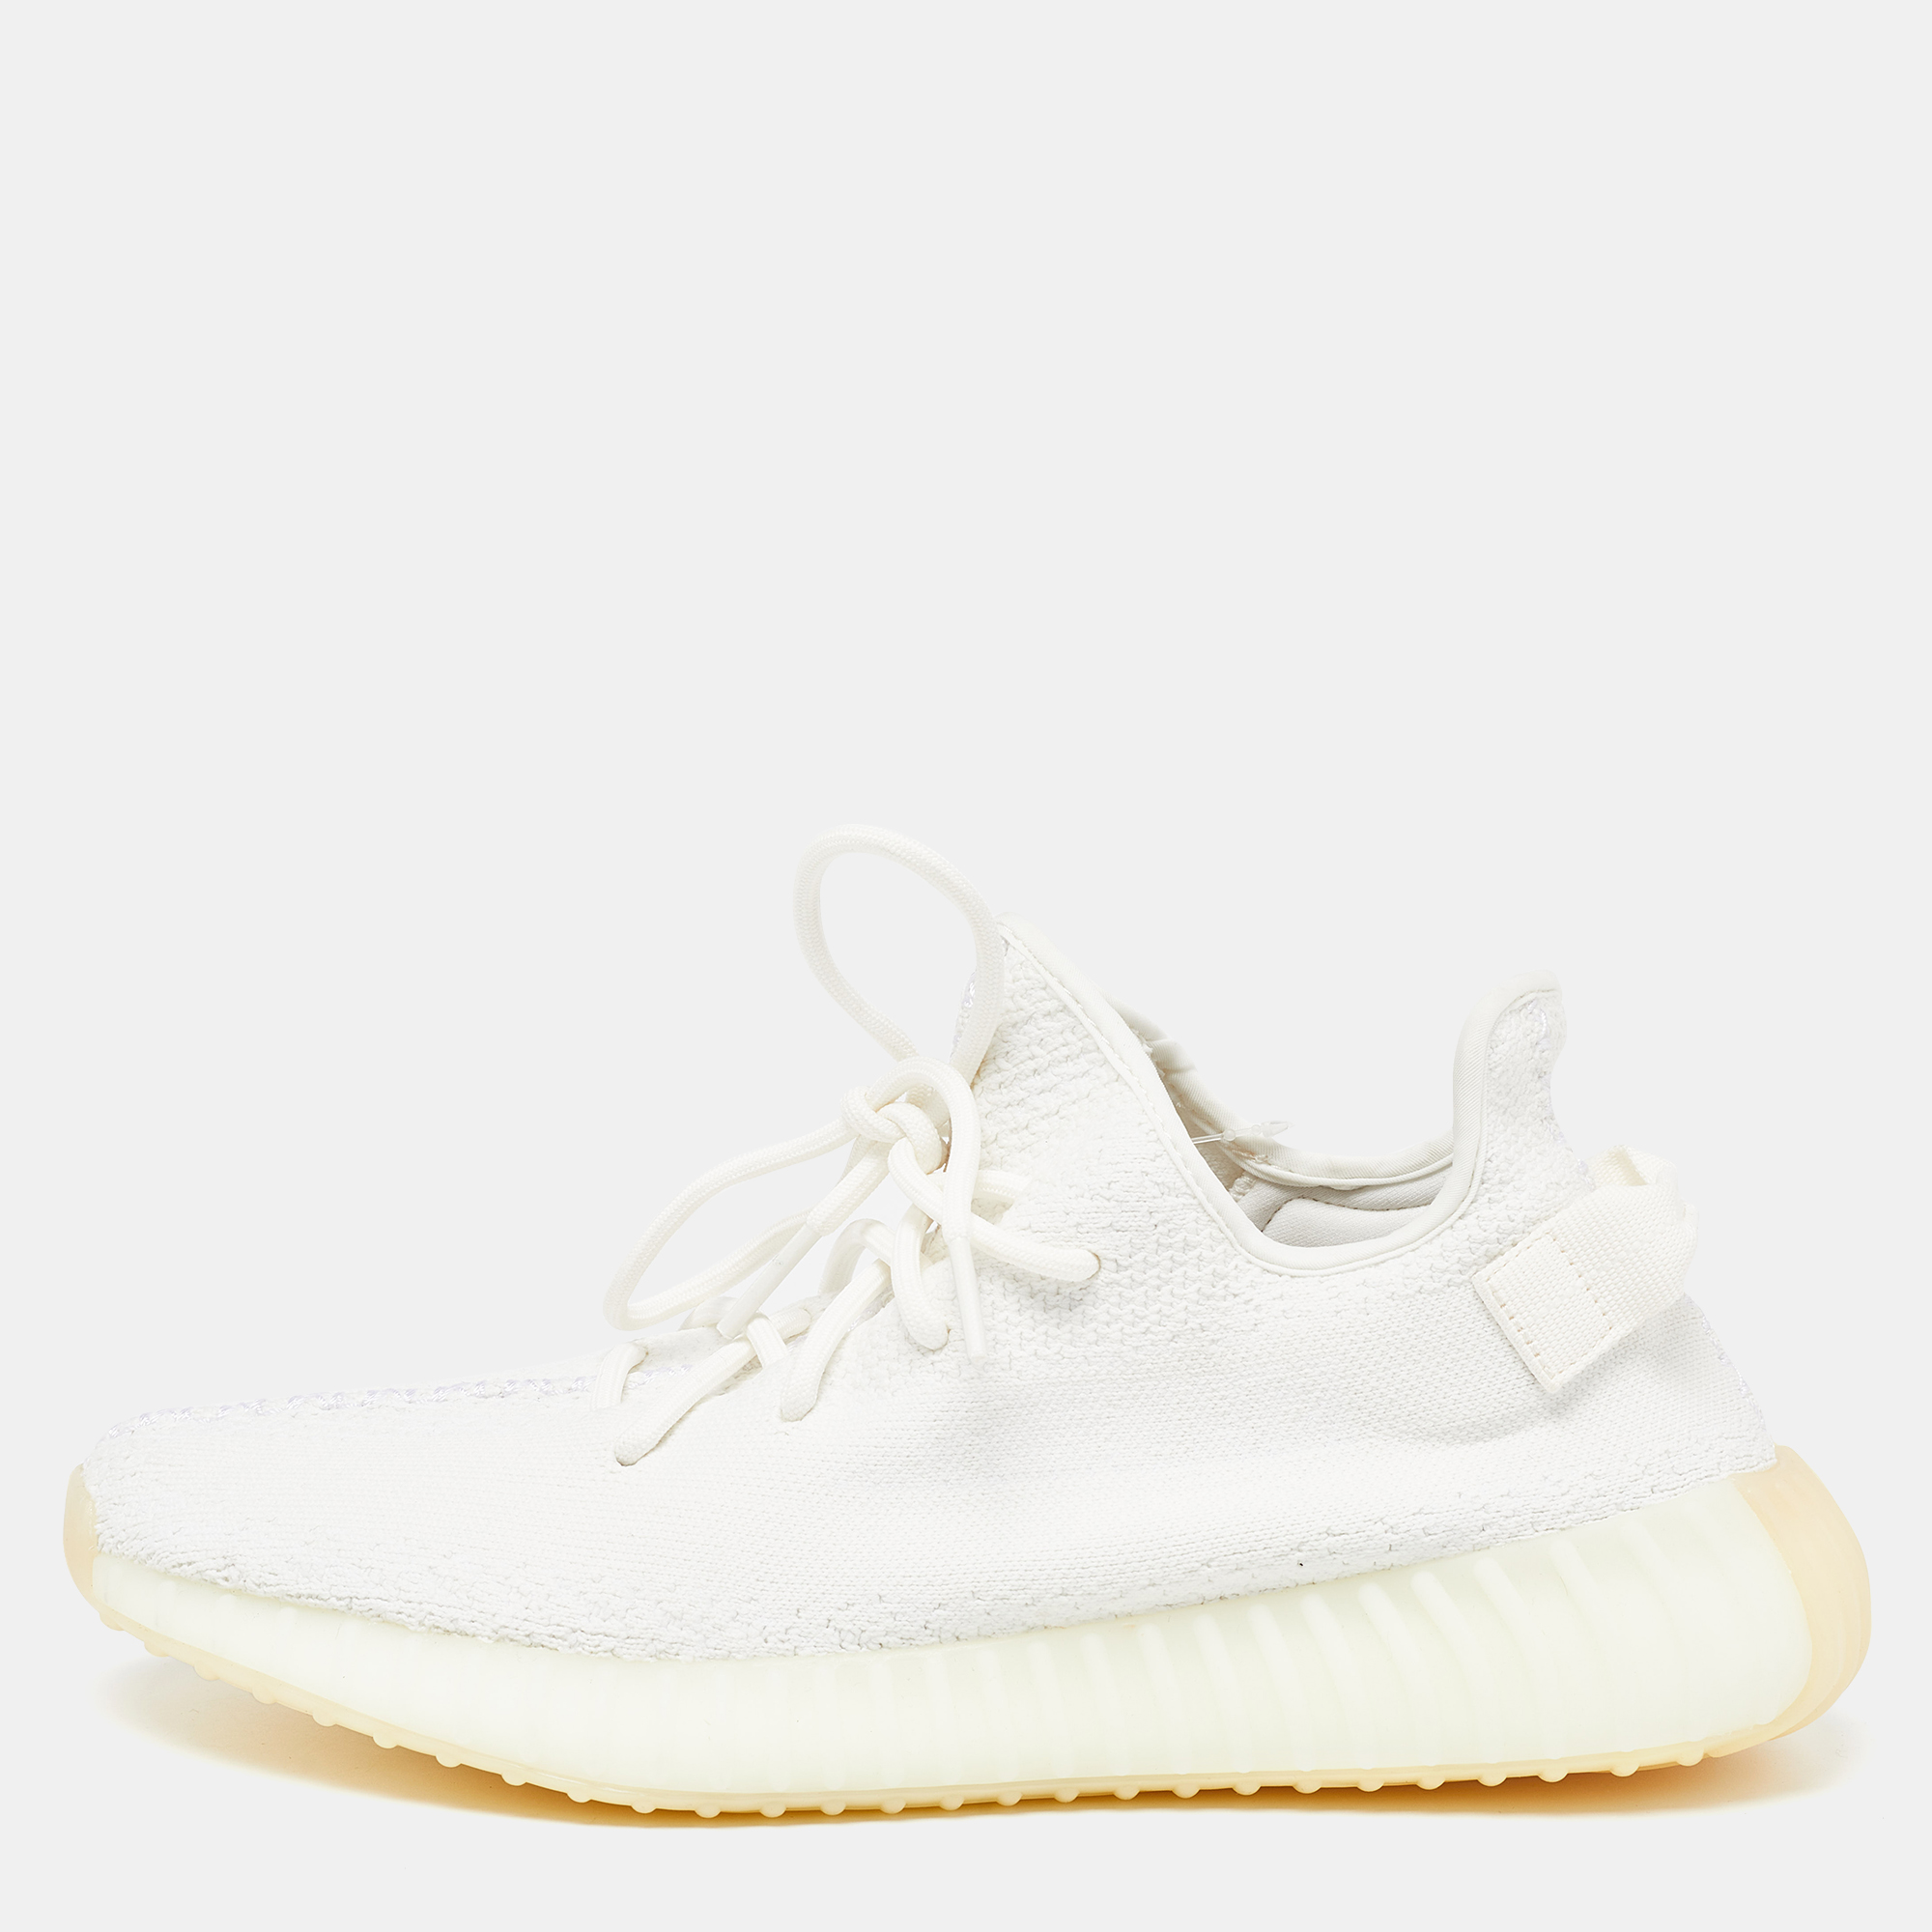 Yeezy X Adidas Off White Knit Fabric Boost 350 V2 Triple White Sneakers Size 46 2/3